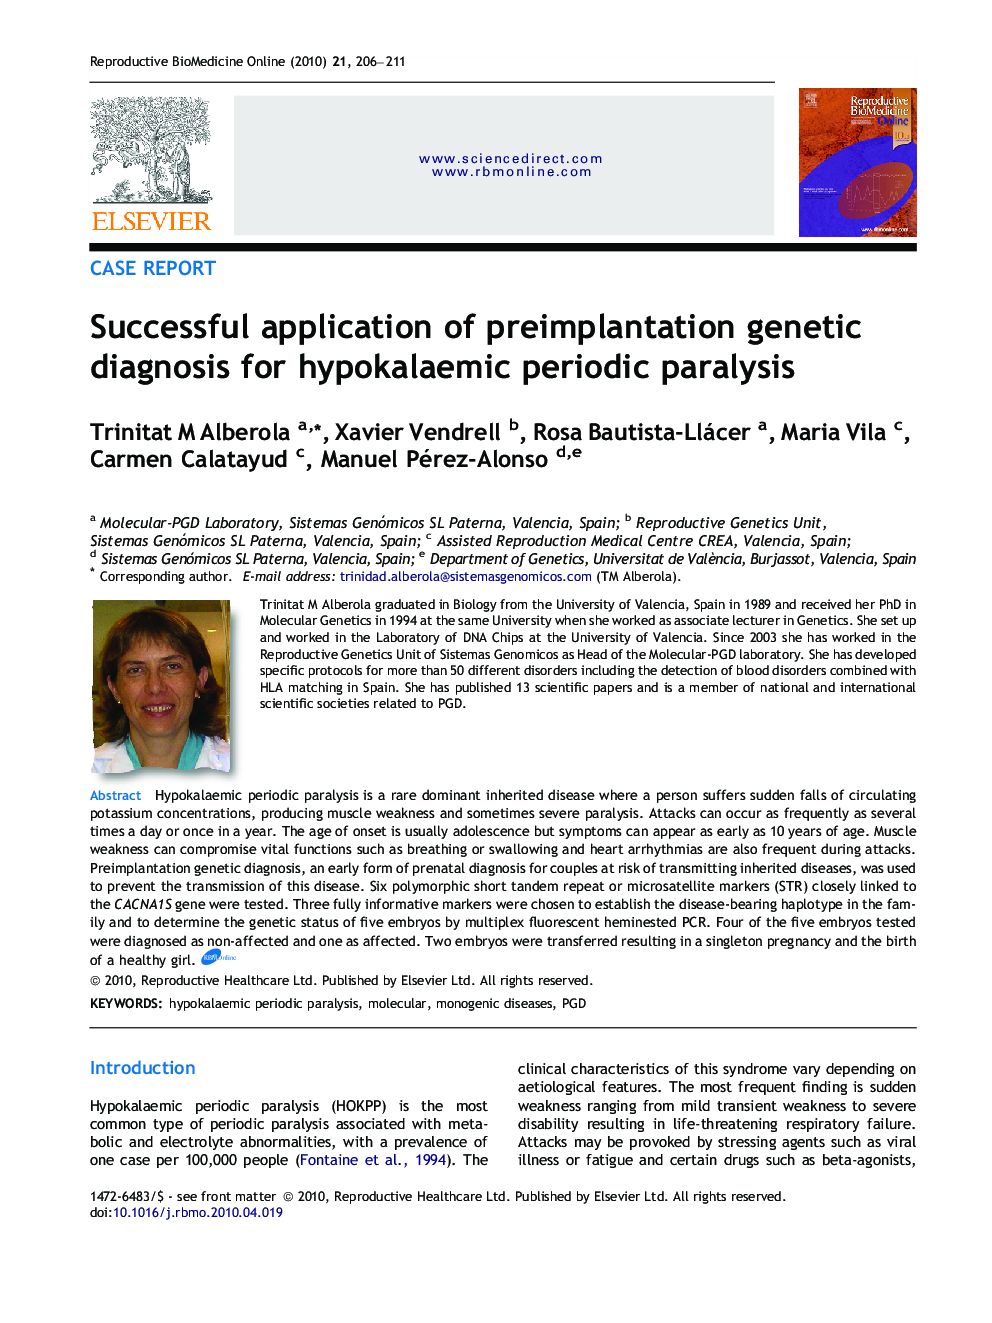 Successful application of preimplantation genetic diagnosis for hypokalaemic periodic paralysis